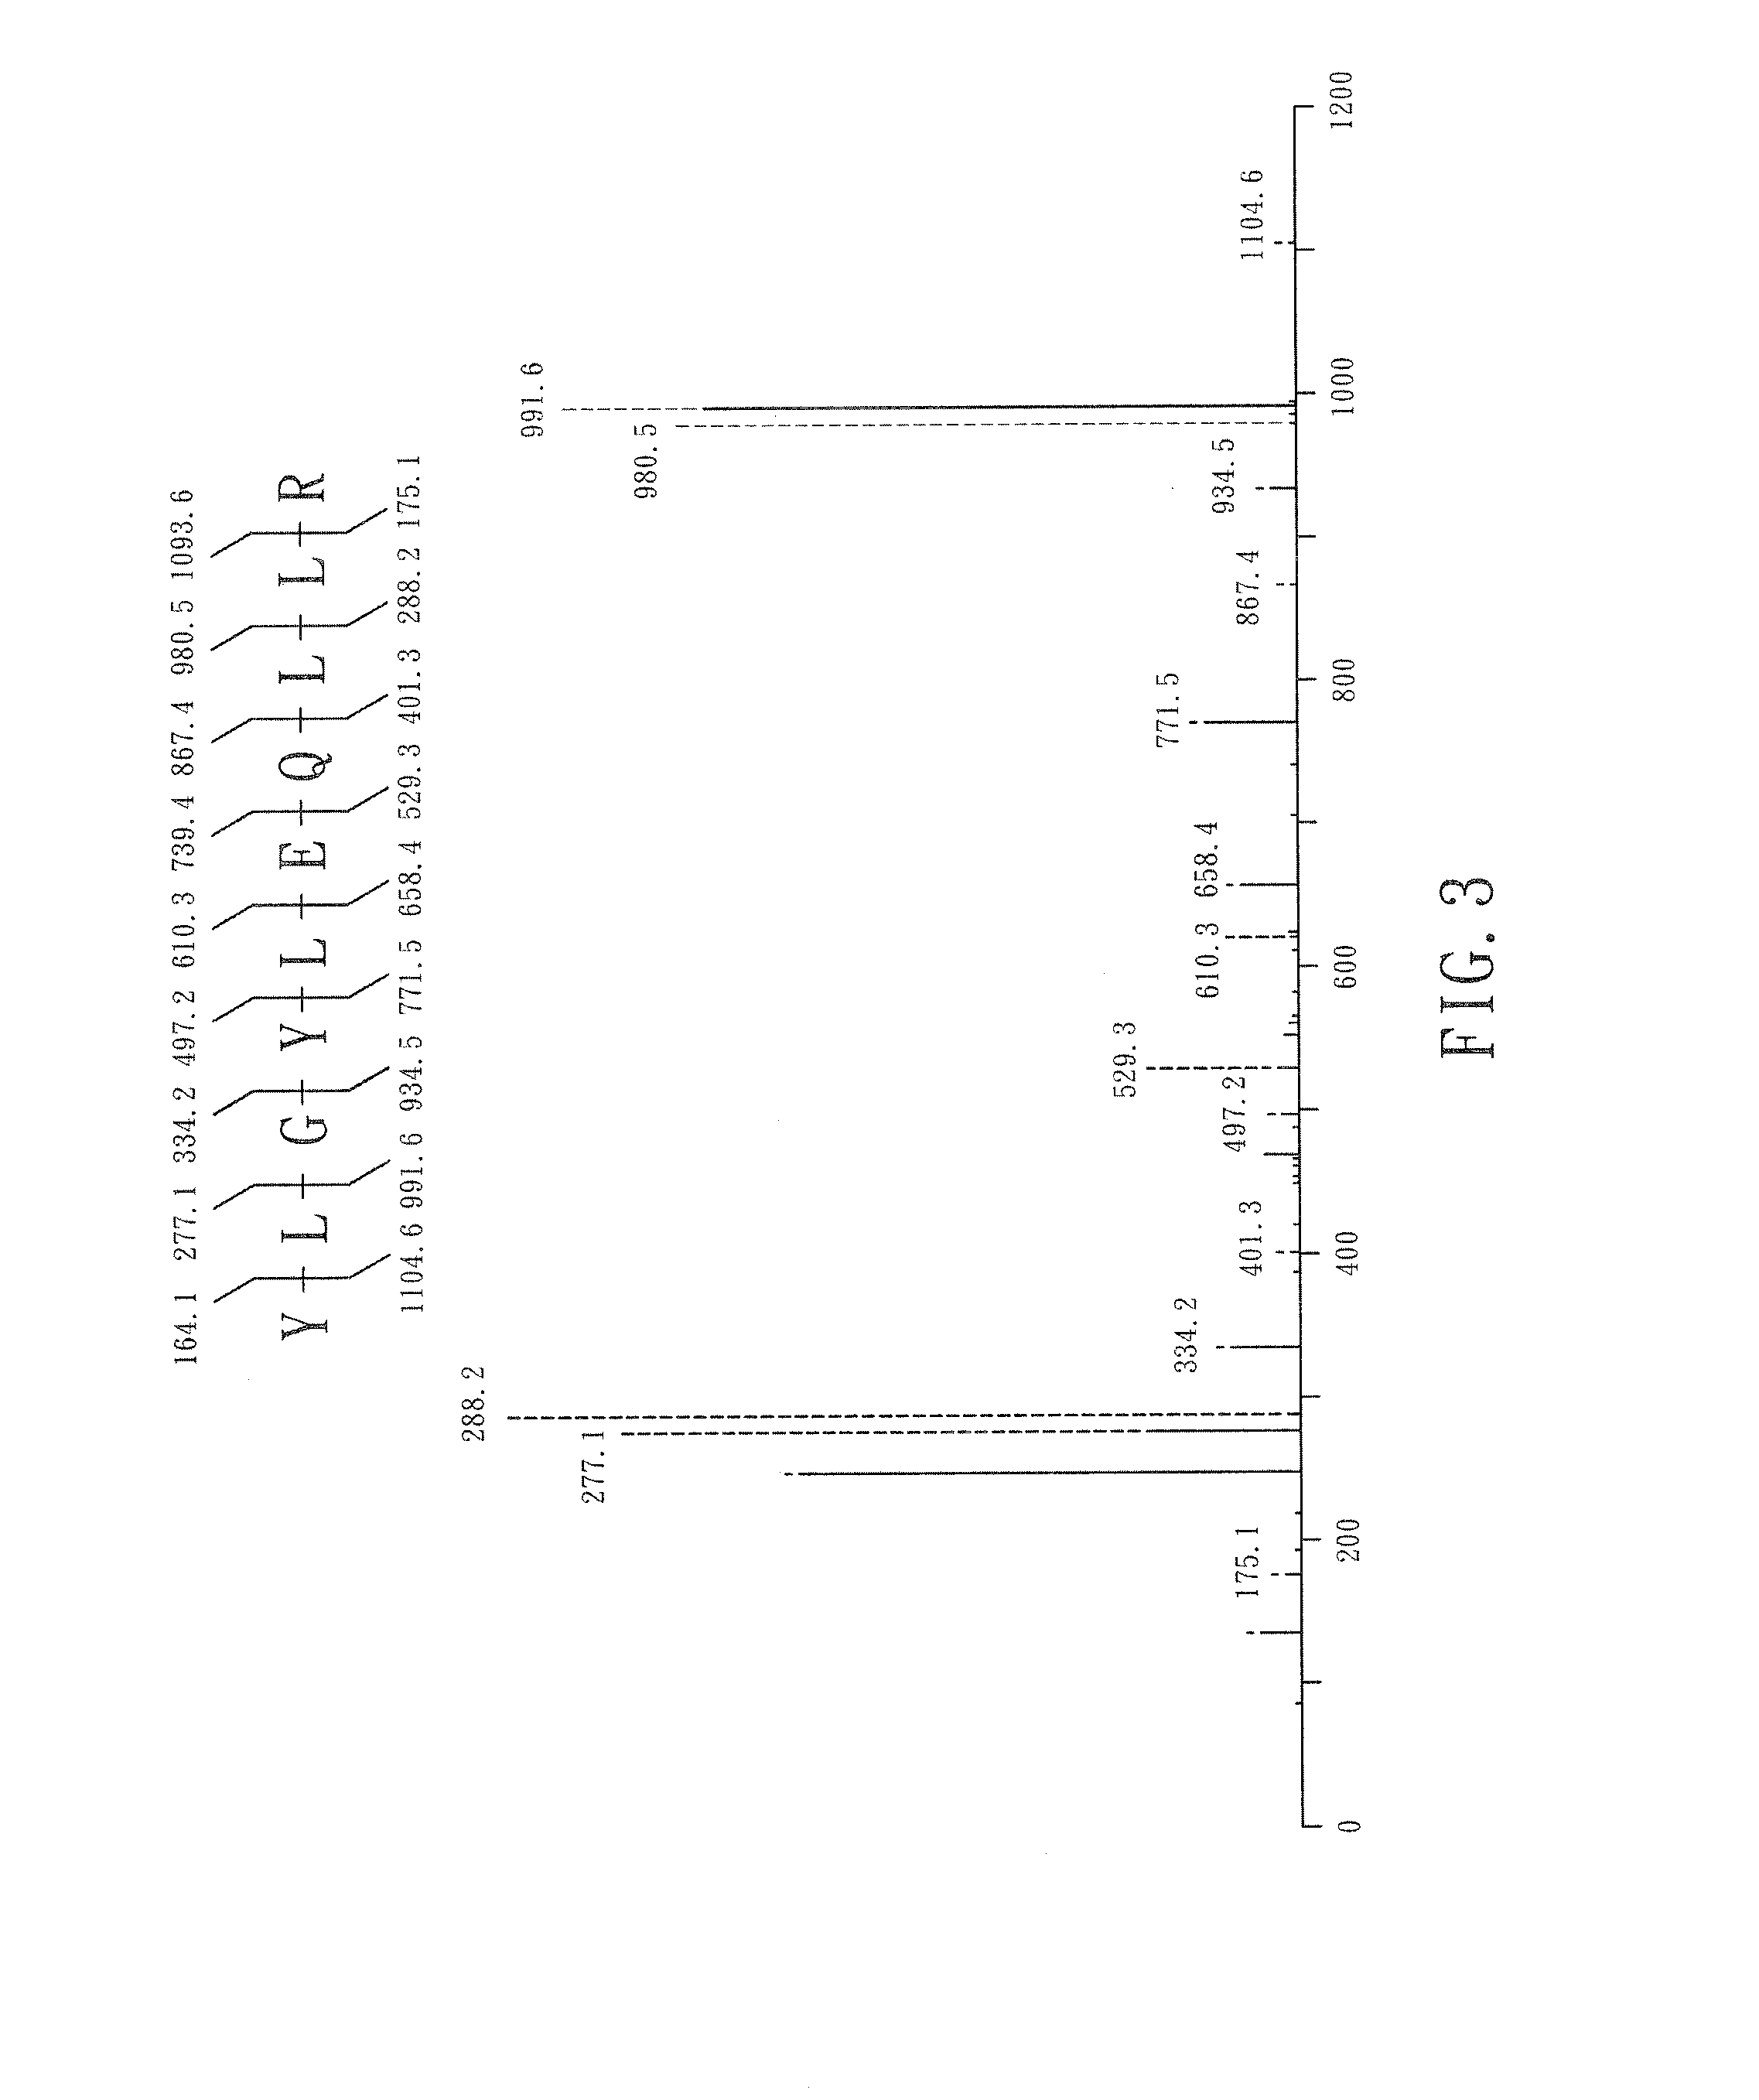 Recombinant protein, pharmaceutical composition containing the same, and method of biosynthesizing